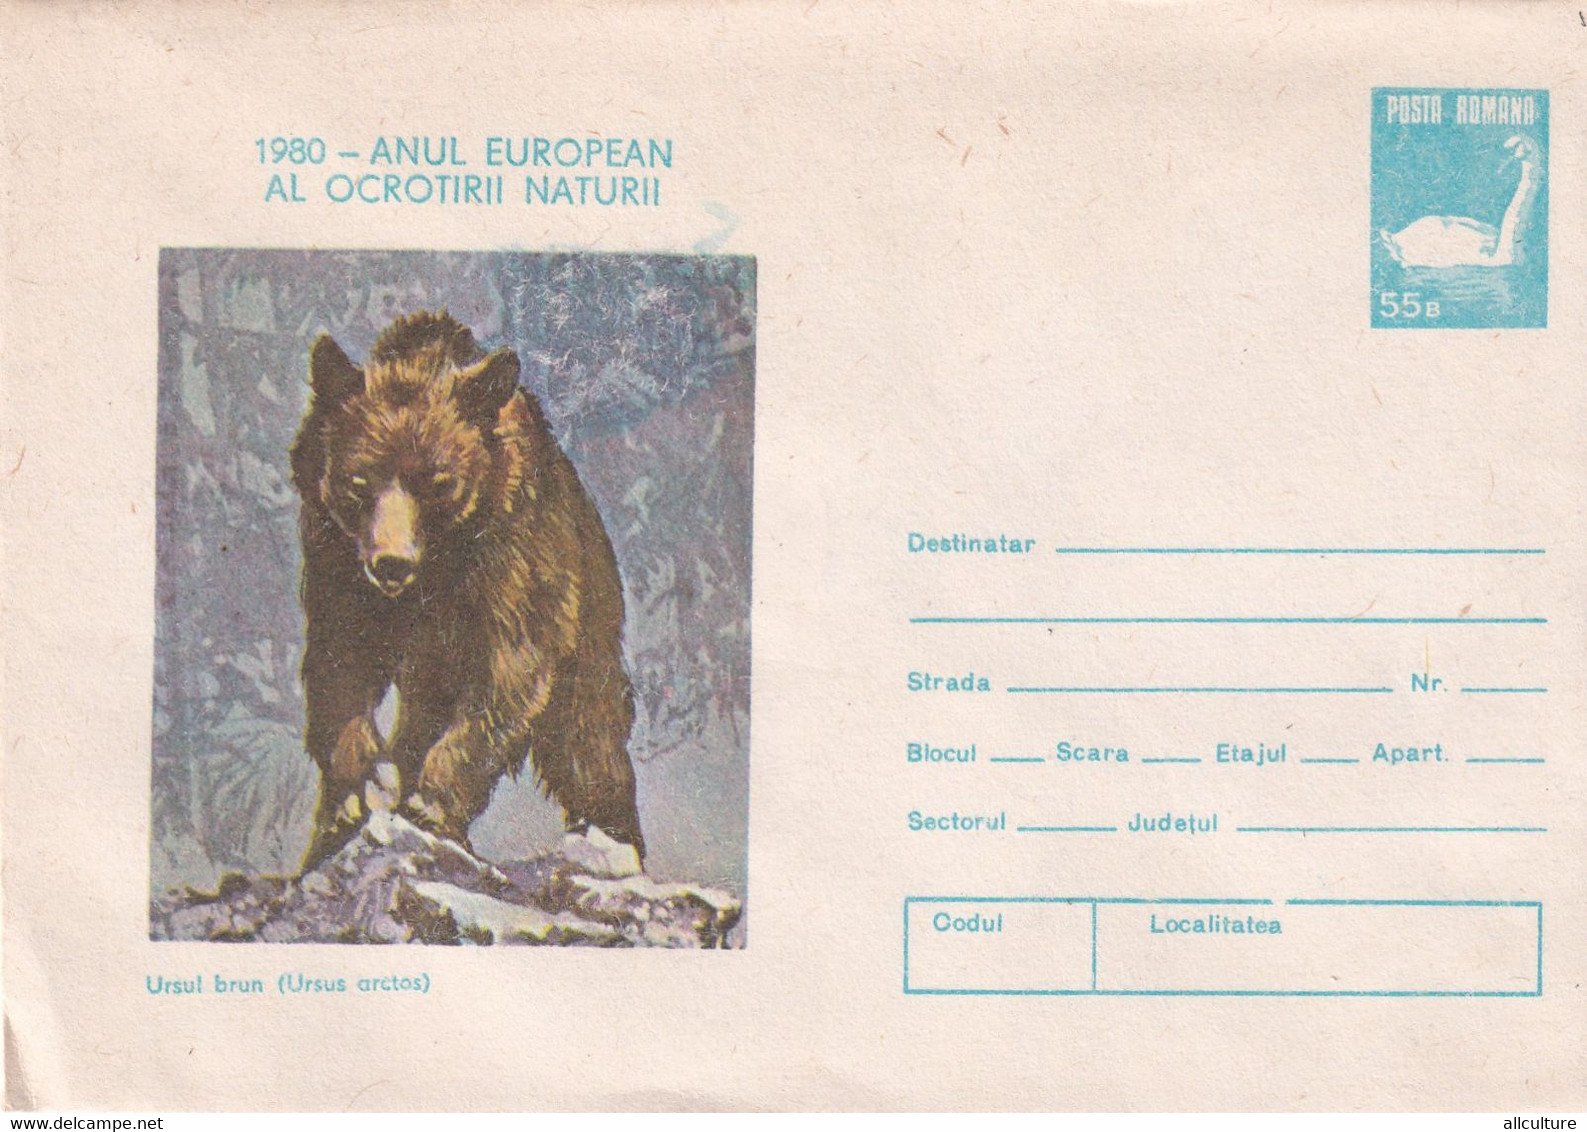 A3139 - The Brown Bear (ursus Arctos) European Year Of Nature Protection 1980 Romania Posta Romana Cover Stationery - Bears